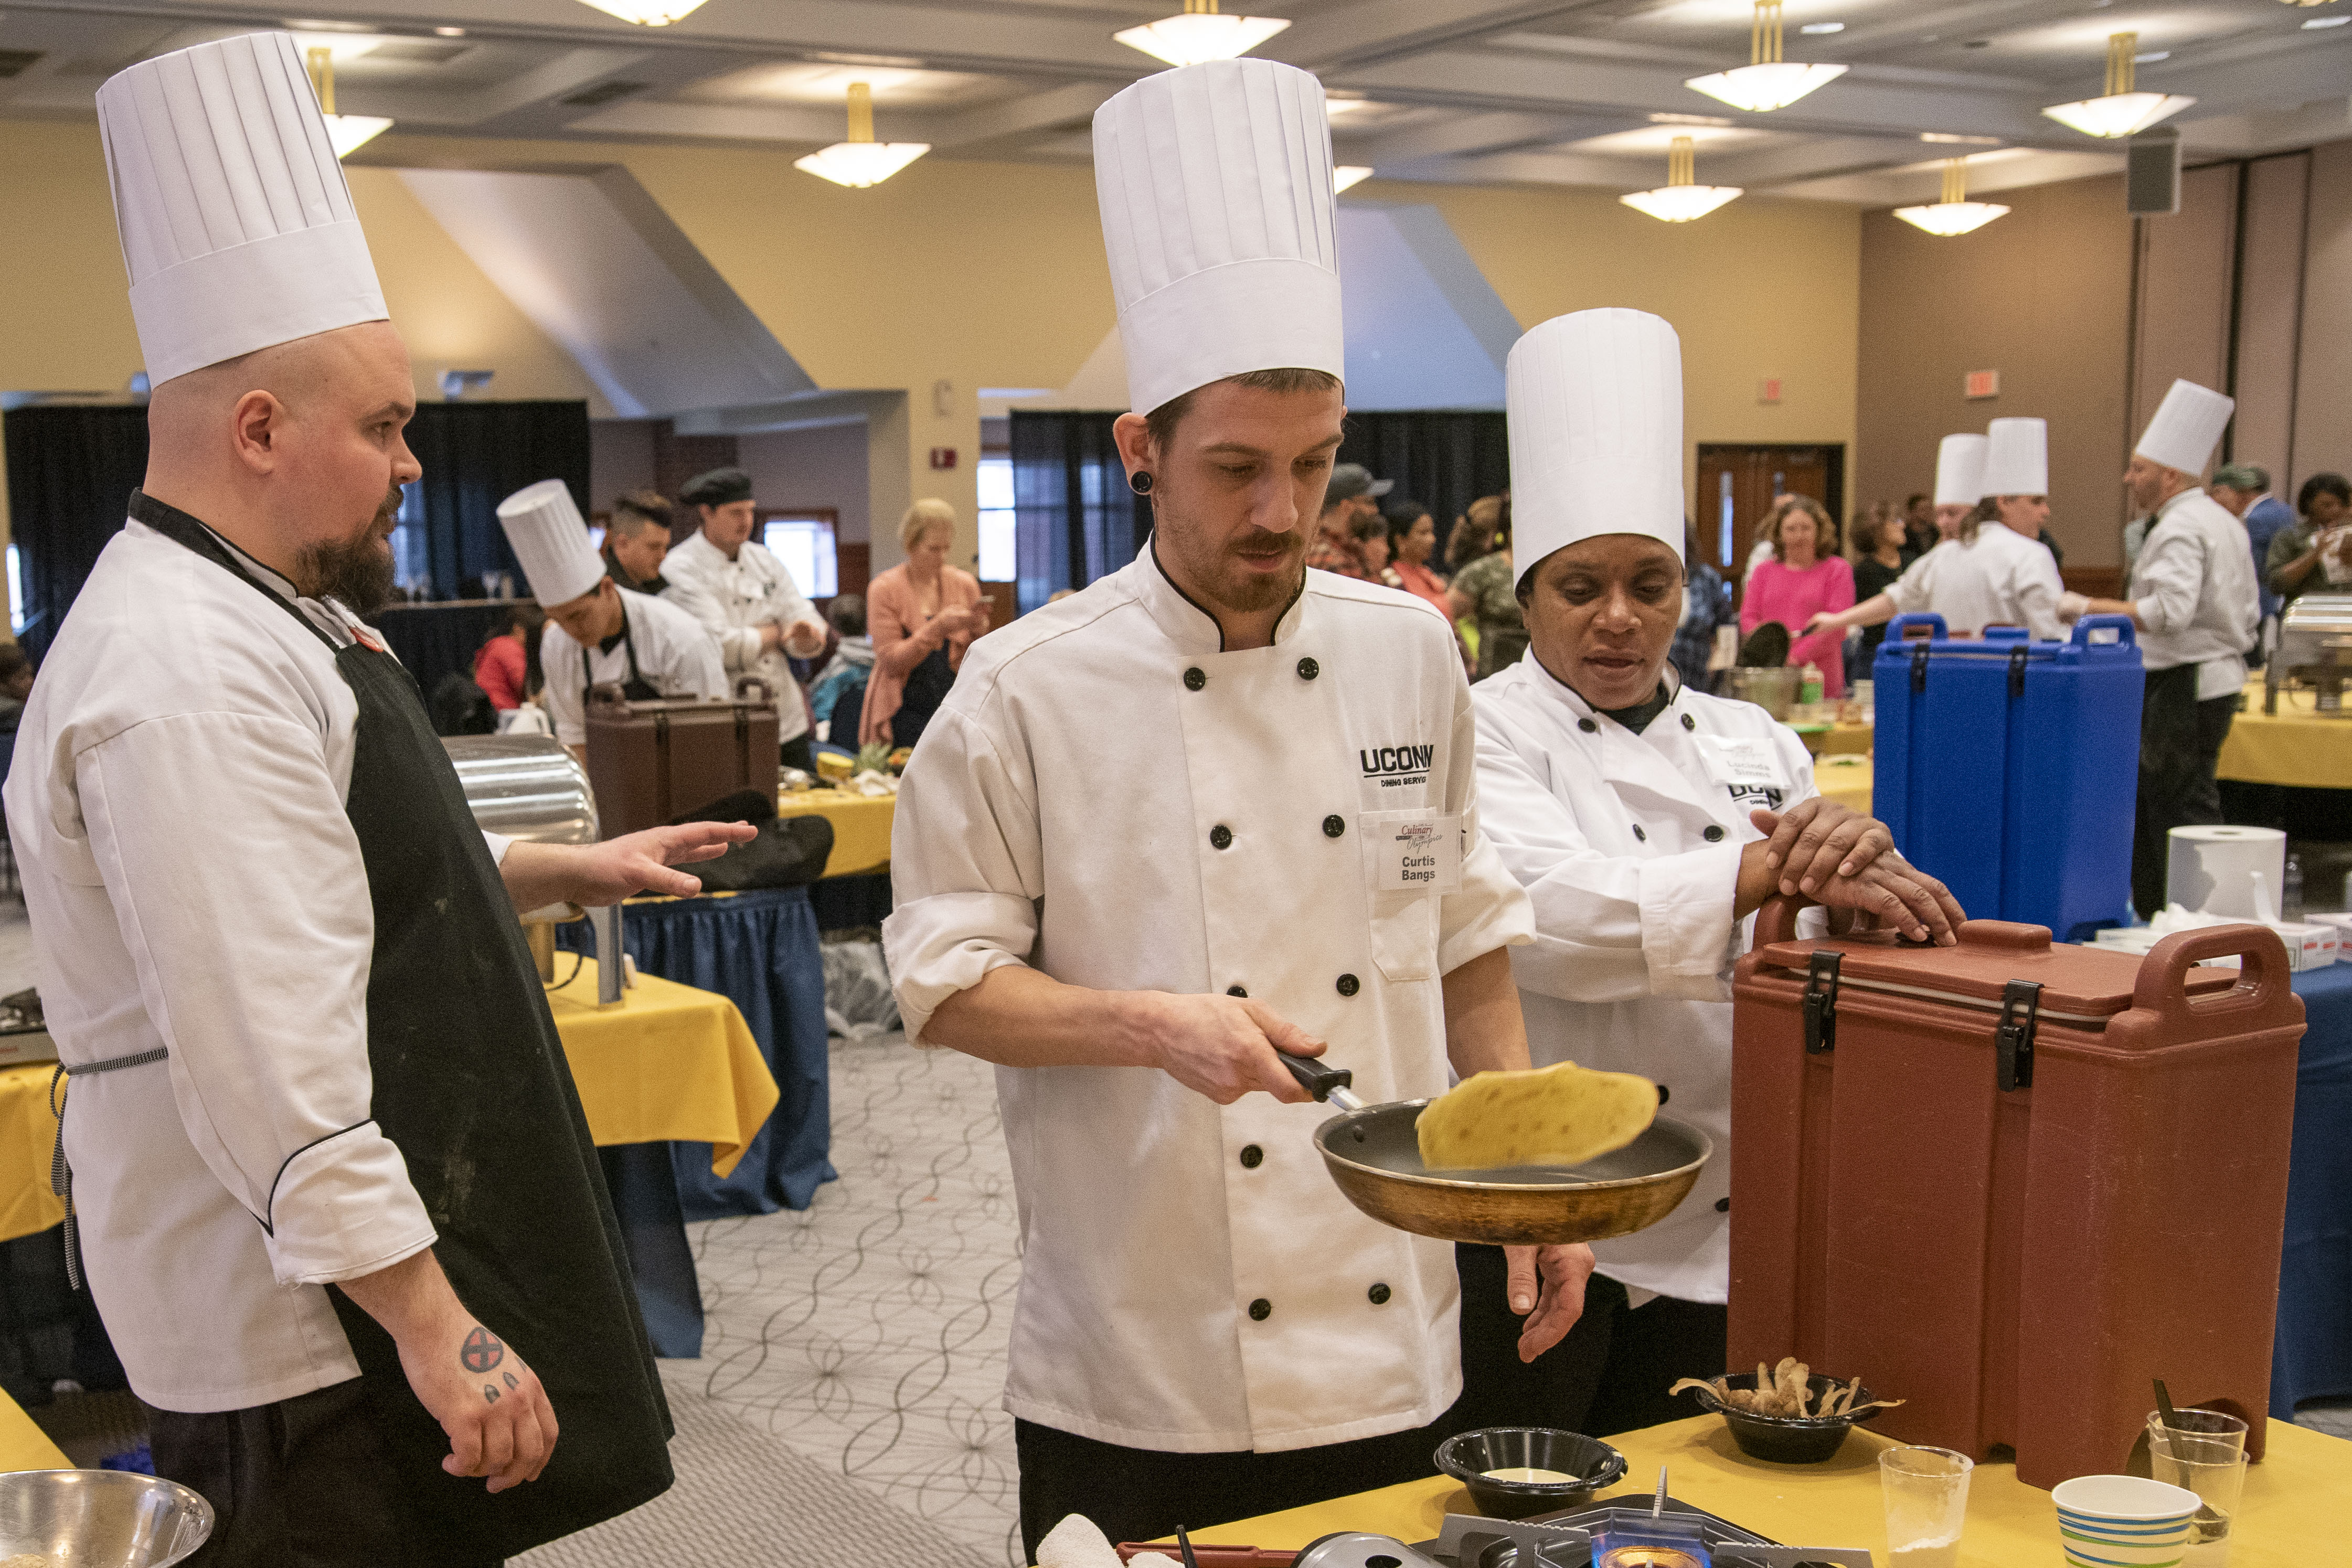 A chef makes a pancake at hte Boiling Point competition during the annual Culinary Olympics.